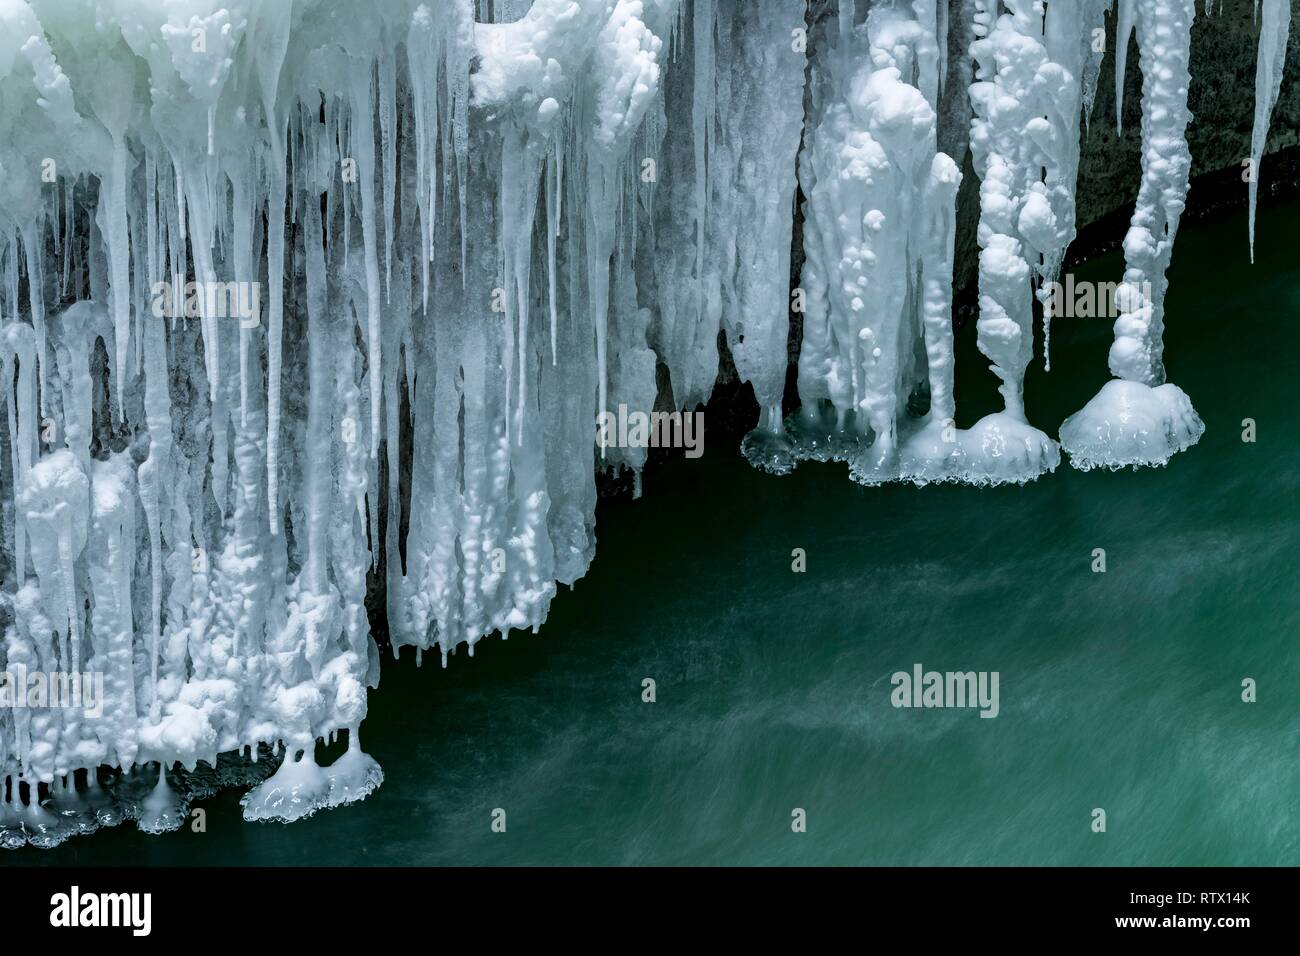 Icicles over running water, Partnach Gorge, Upper Bavaria, Germany Stock Photo